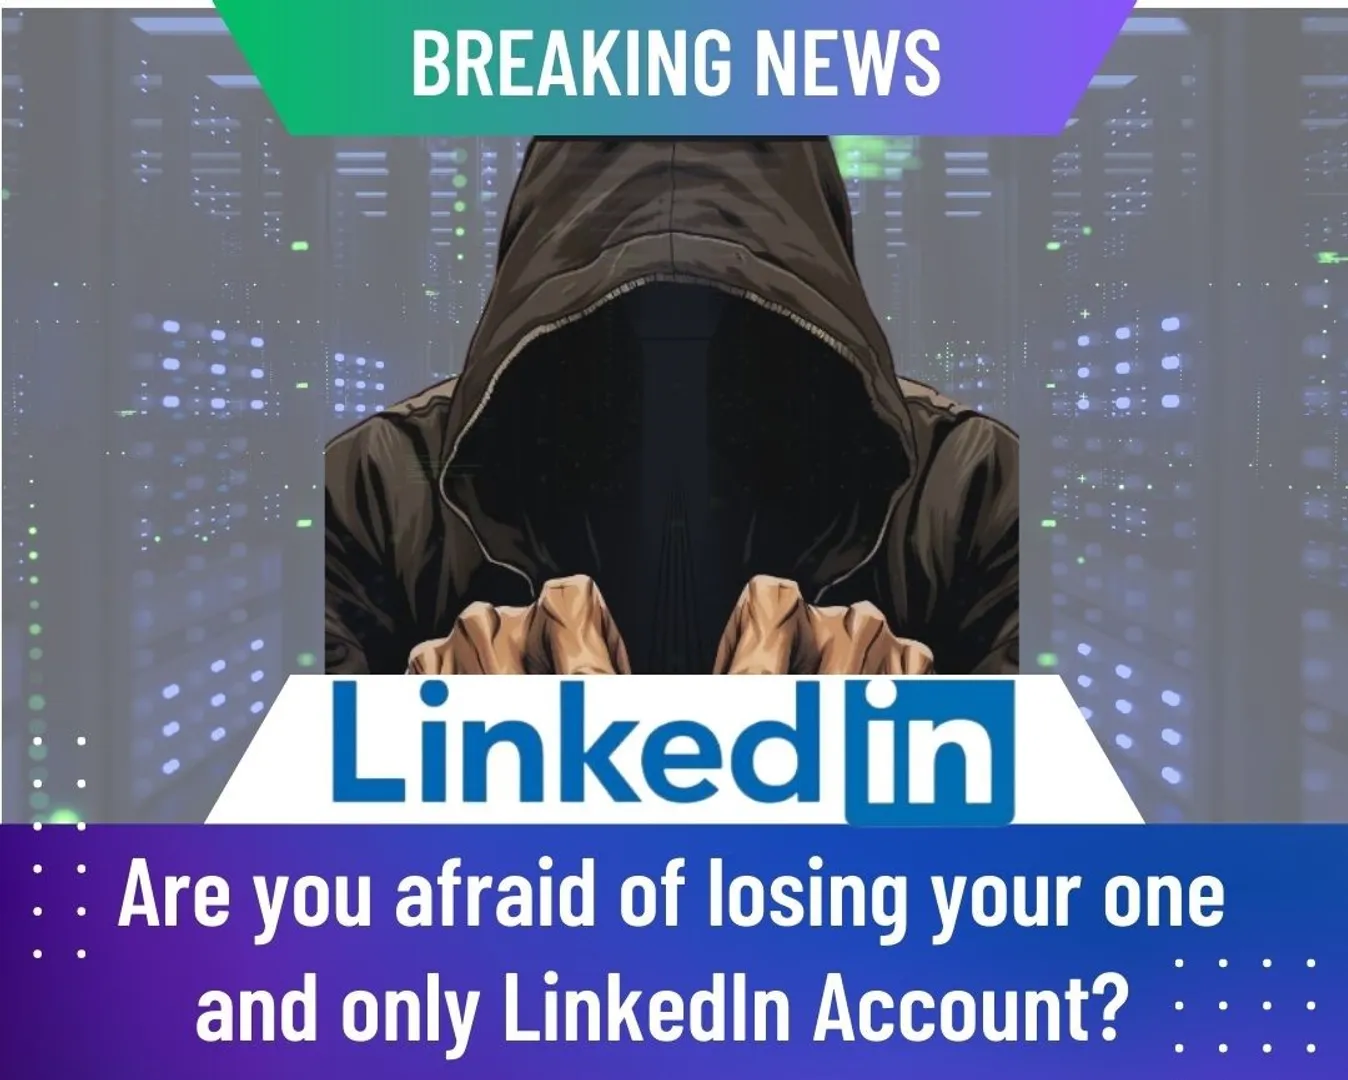 We’ve reached a significant milestone in the AI Leaders Alliance Group on LinkedIn – we now have 100 incredible members worldwide! 🌎🌟Thank you for being a part of our growing community. Read my latest article: ‘Guarding LinkedIn Profiles: AI vs. Rising Hacks.’ 🤝Let’s continue to share insights, network, and explore the fascinating world of AI together!

📣Click link to join AiLA group

https://www.linkedin.com/groups/14148540

39th edition of weekly newsletter
https://www.linkedin.com/pulse/guarding-linkedin-profiles-ai-vs-rising-hacks-jean-ng-web3-%25E1%25B5%258D%25E1%25B5%2590-

#AI #LinkedIn